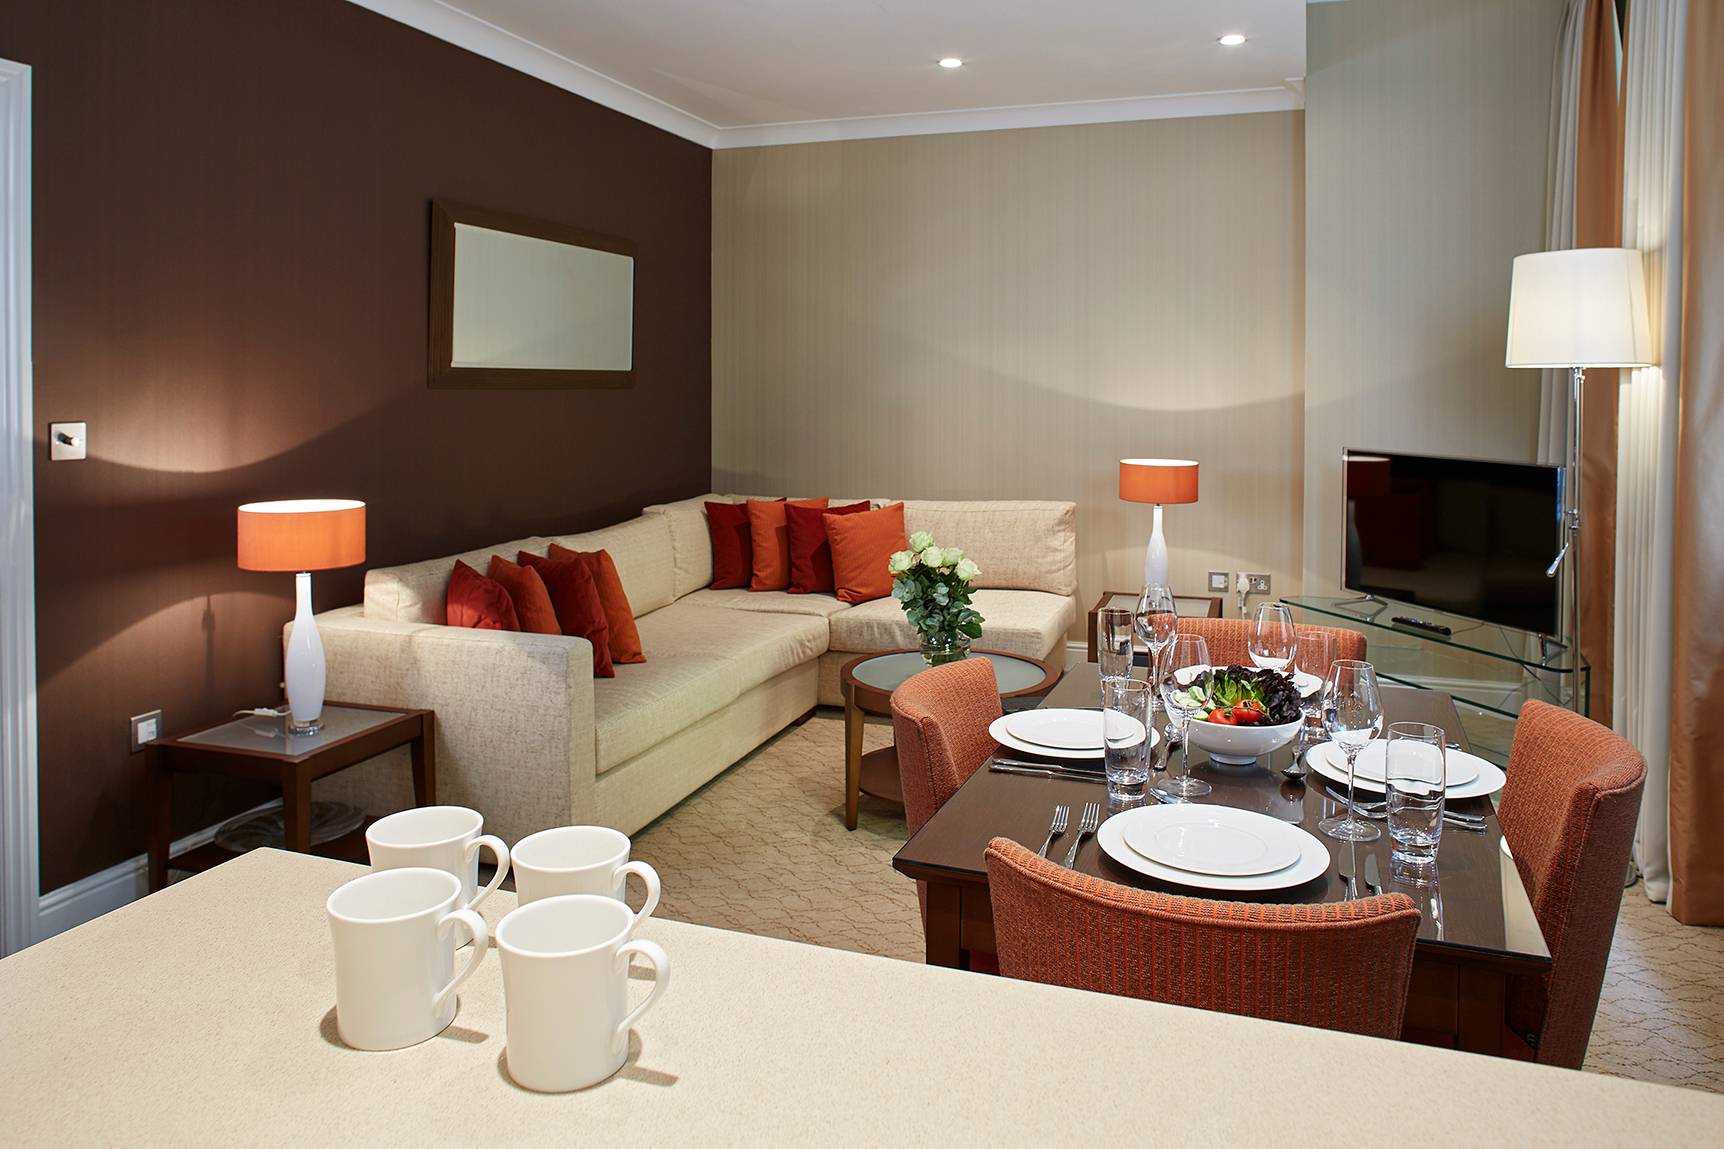 Newly Refurbished Luxury Two-Bedroom Serviced Apartment with premium amenities in the heart of the City of London